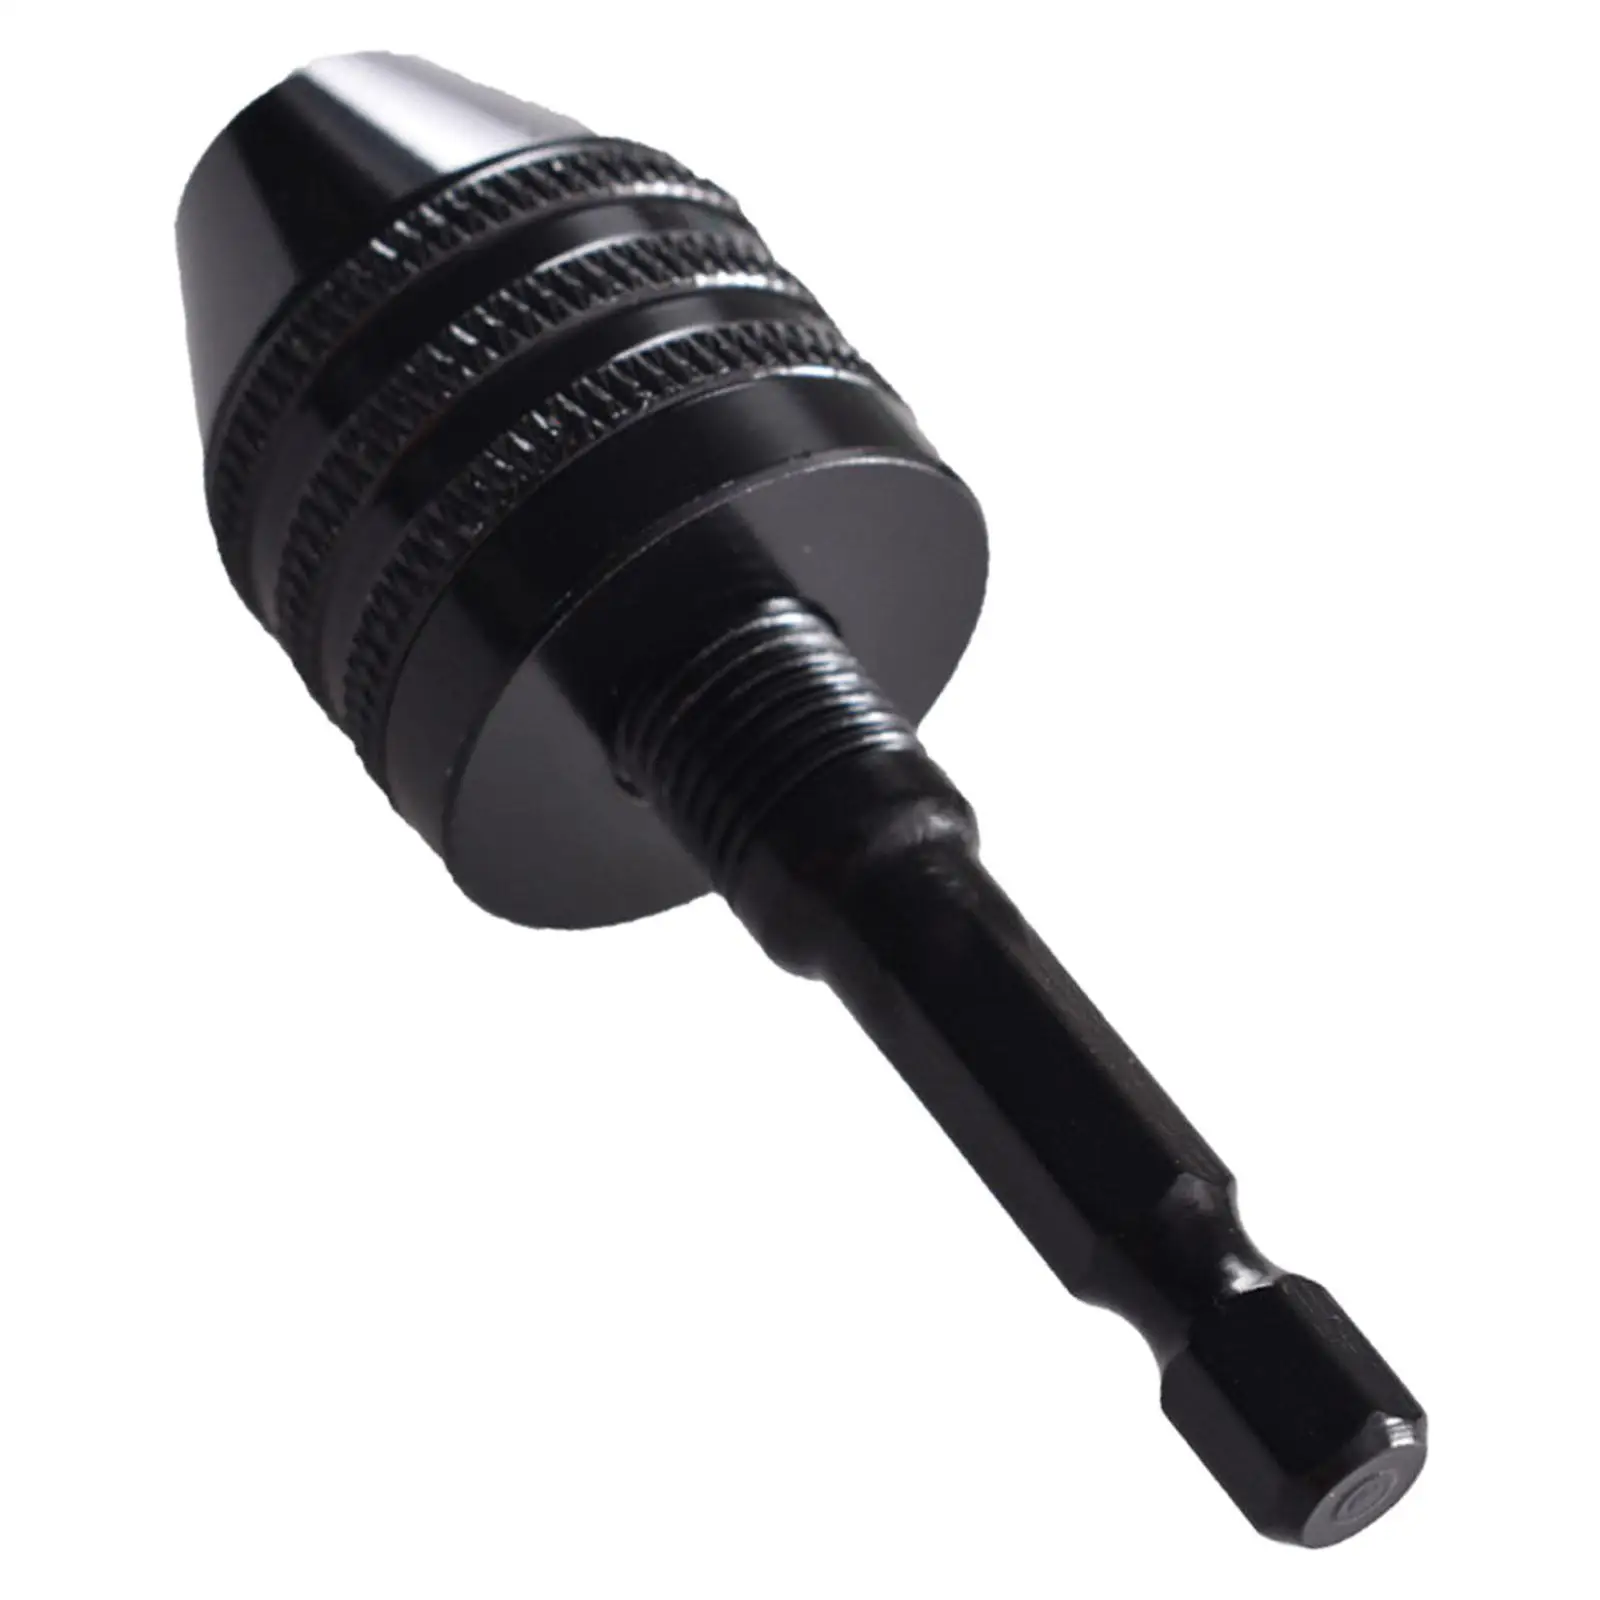 Hex Keyless Drill Chuck, Quick Change Adapter Converter Impact Drills Bits, Electric Tool Accessories 0.6-8mm